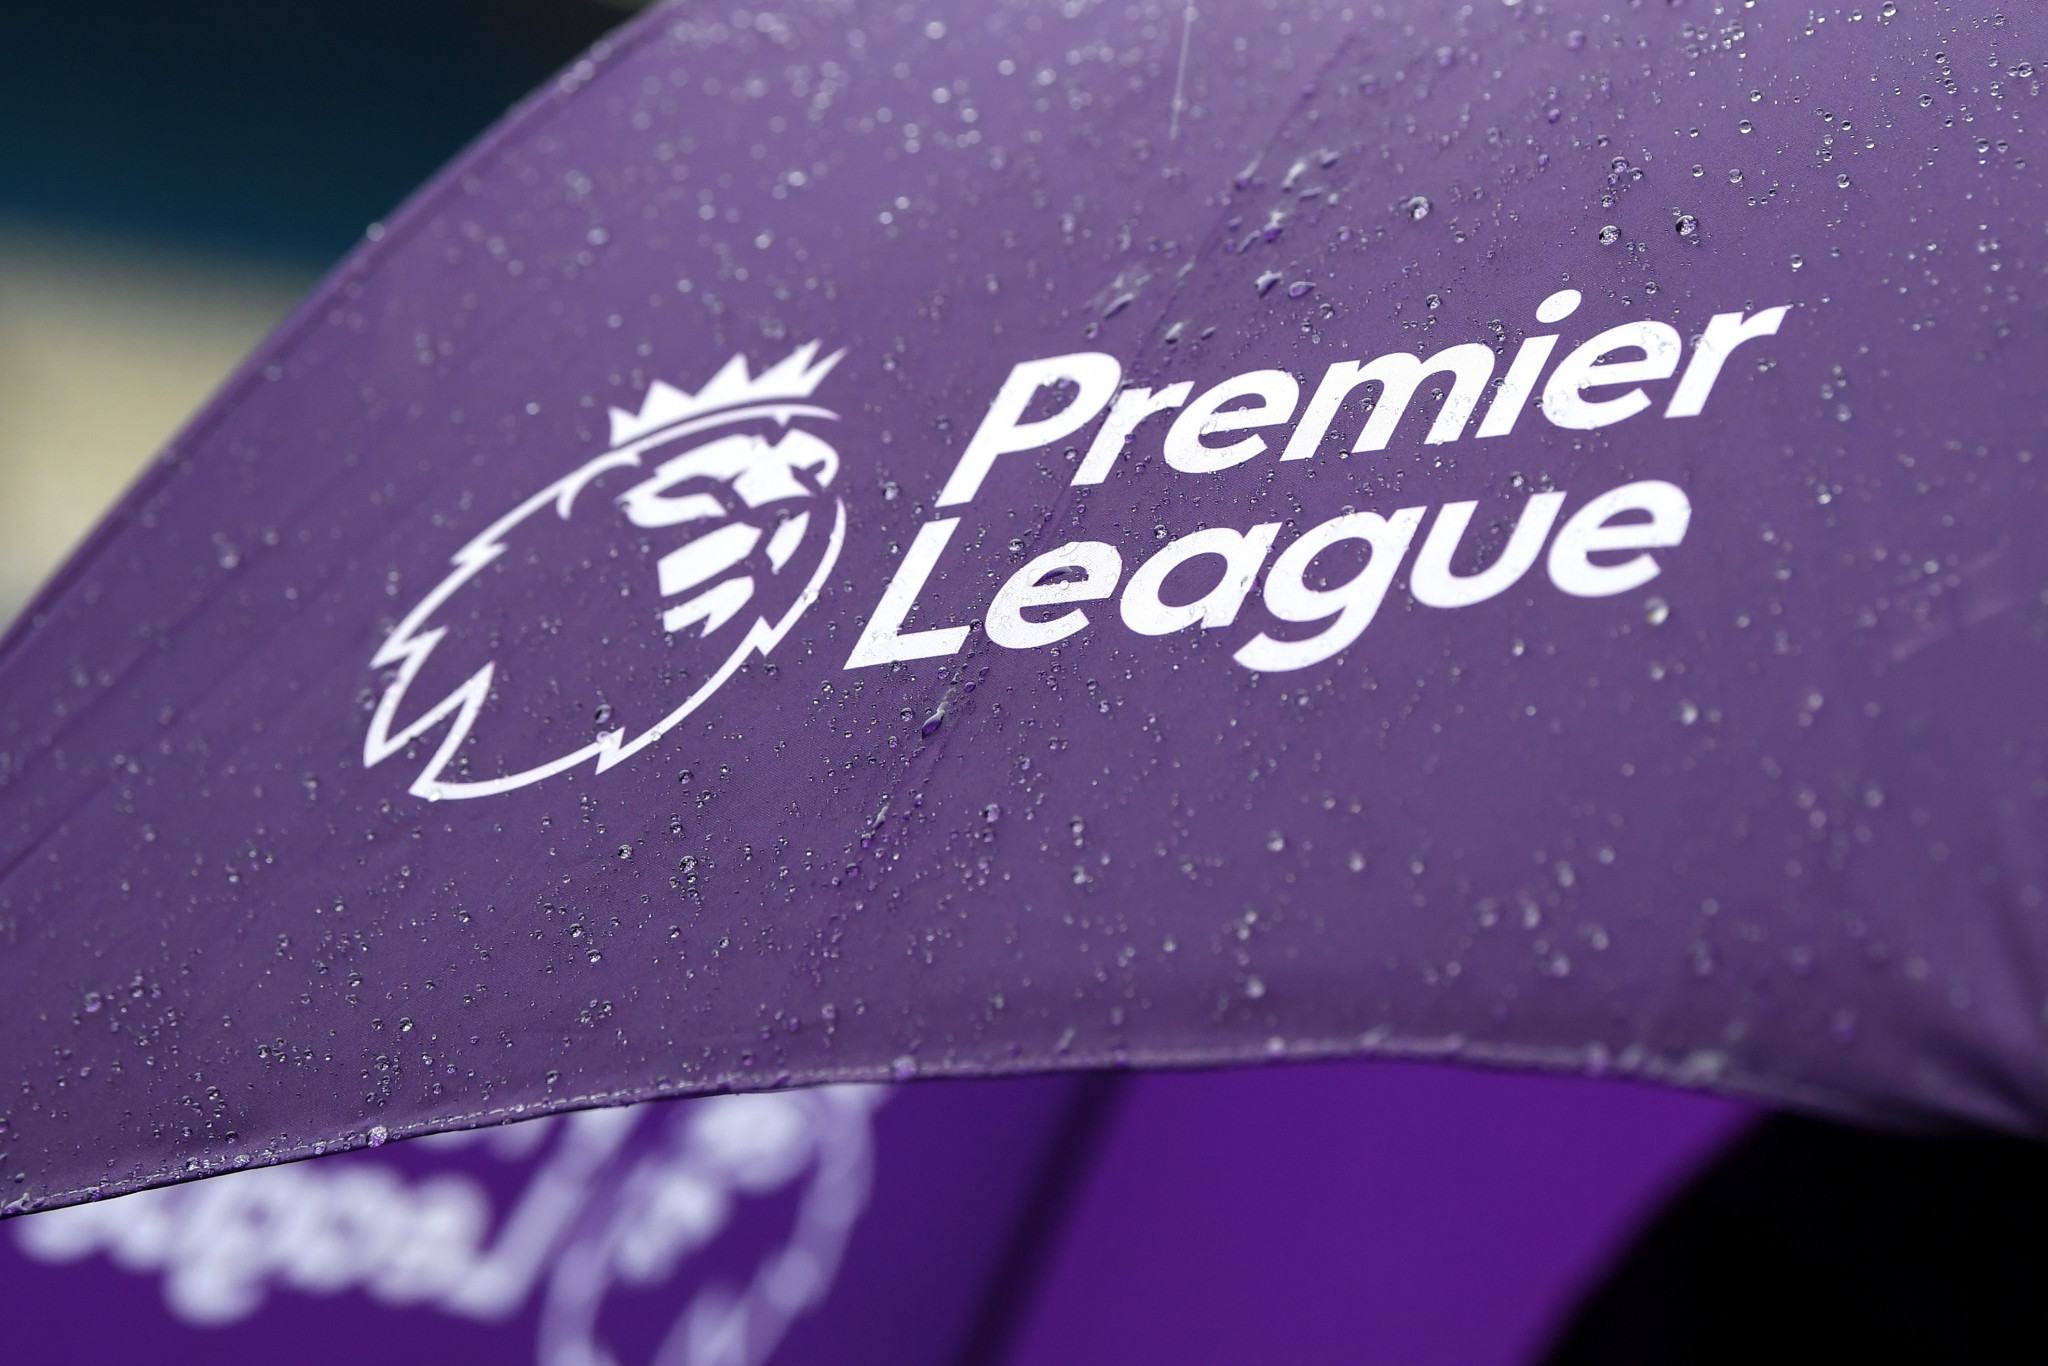 The upcoming round of Premier League fixtures has been postponed ©Getty Images